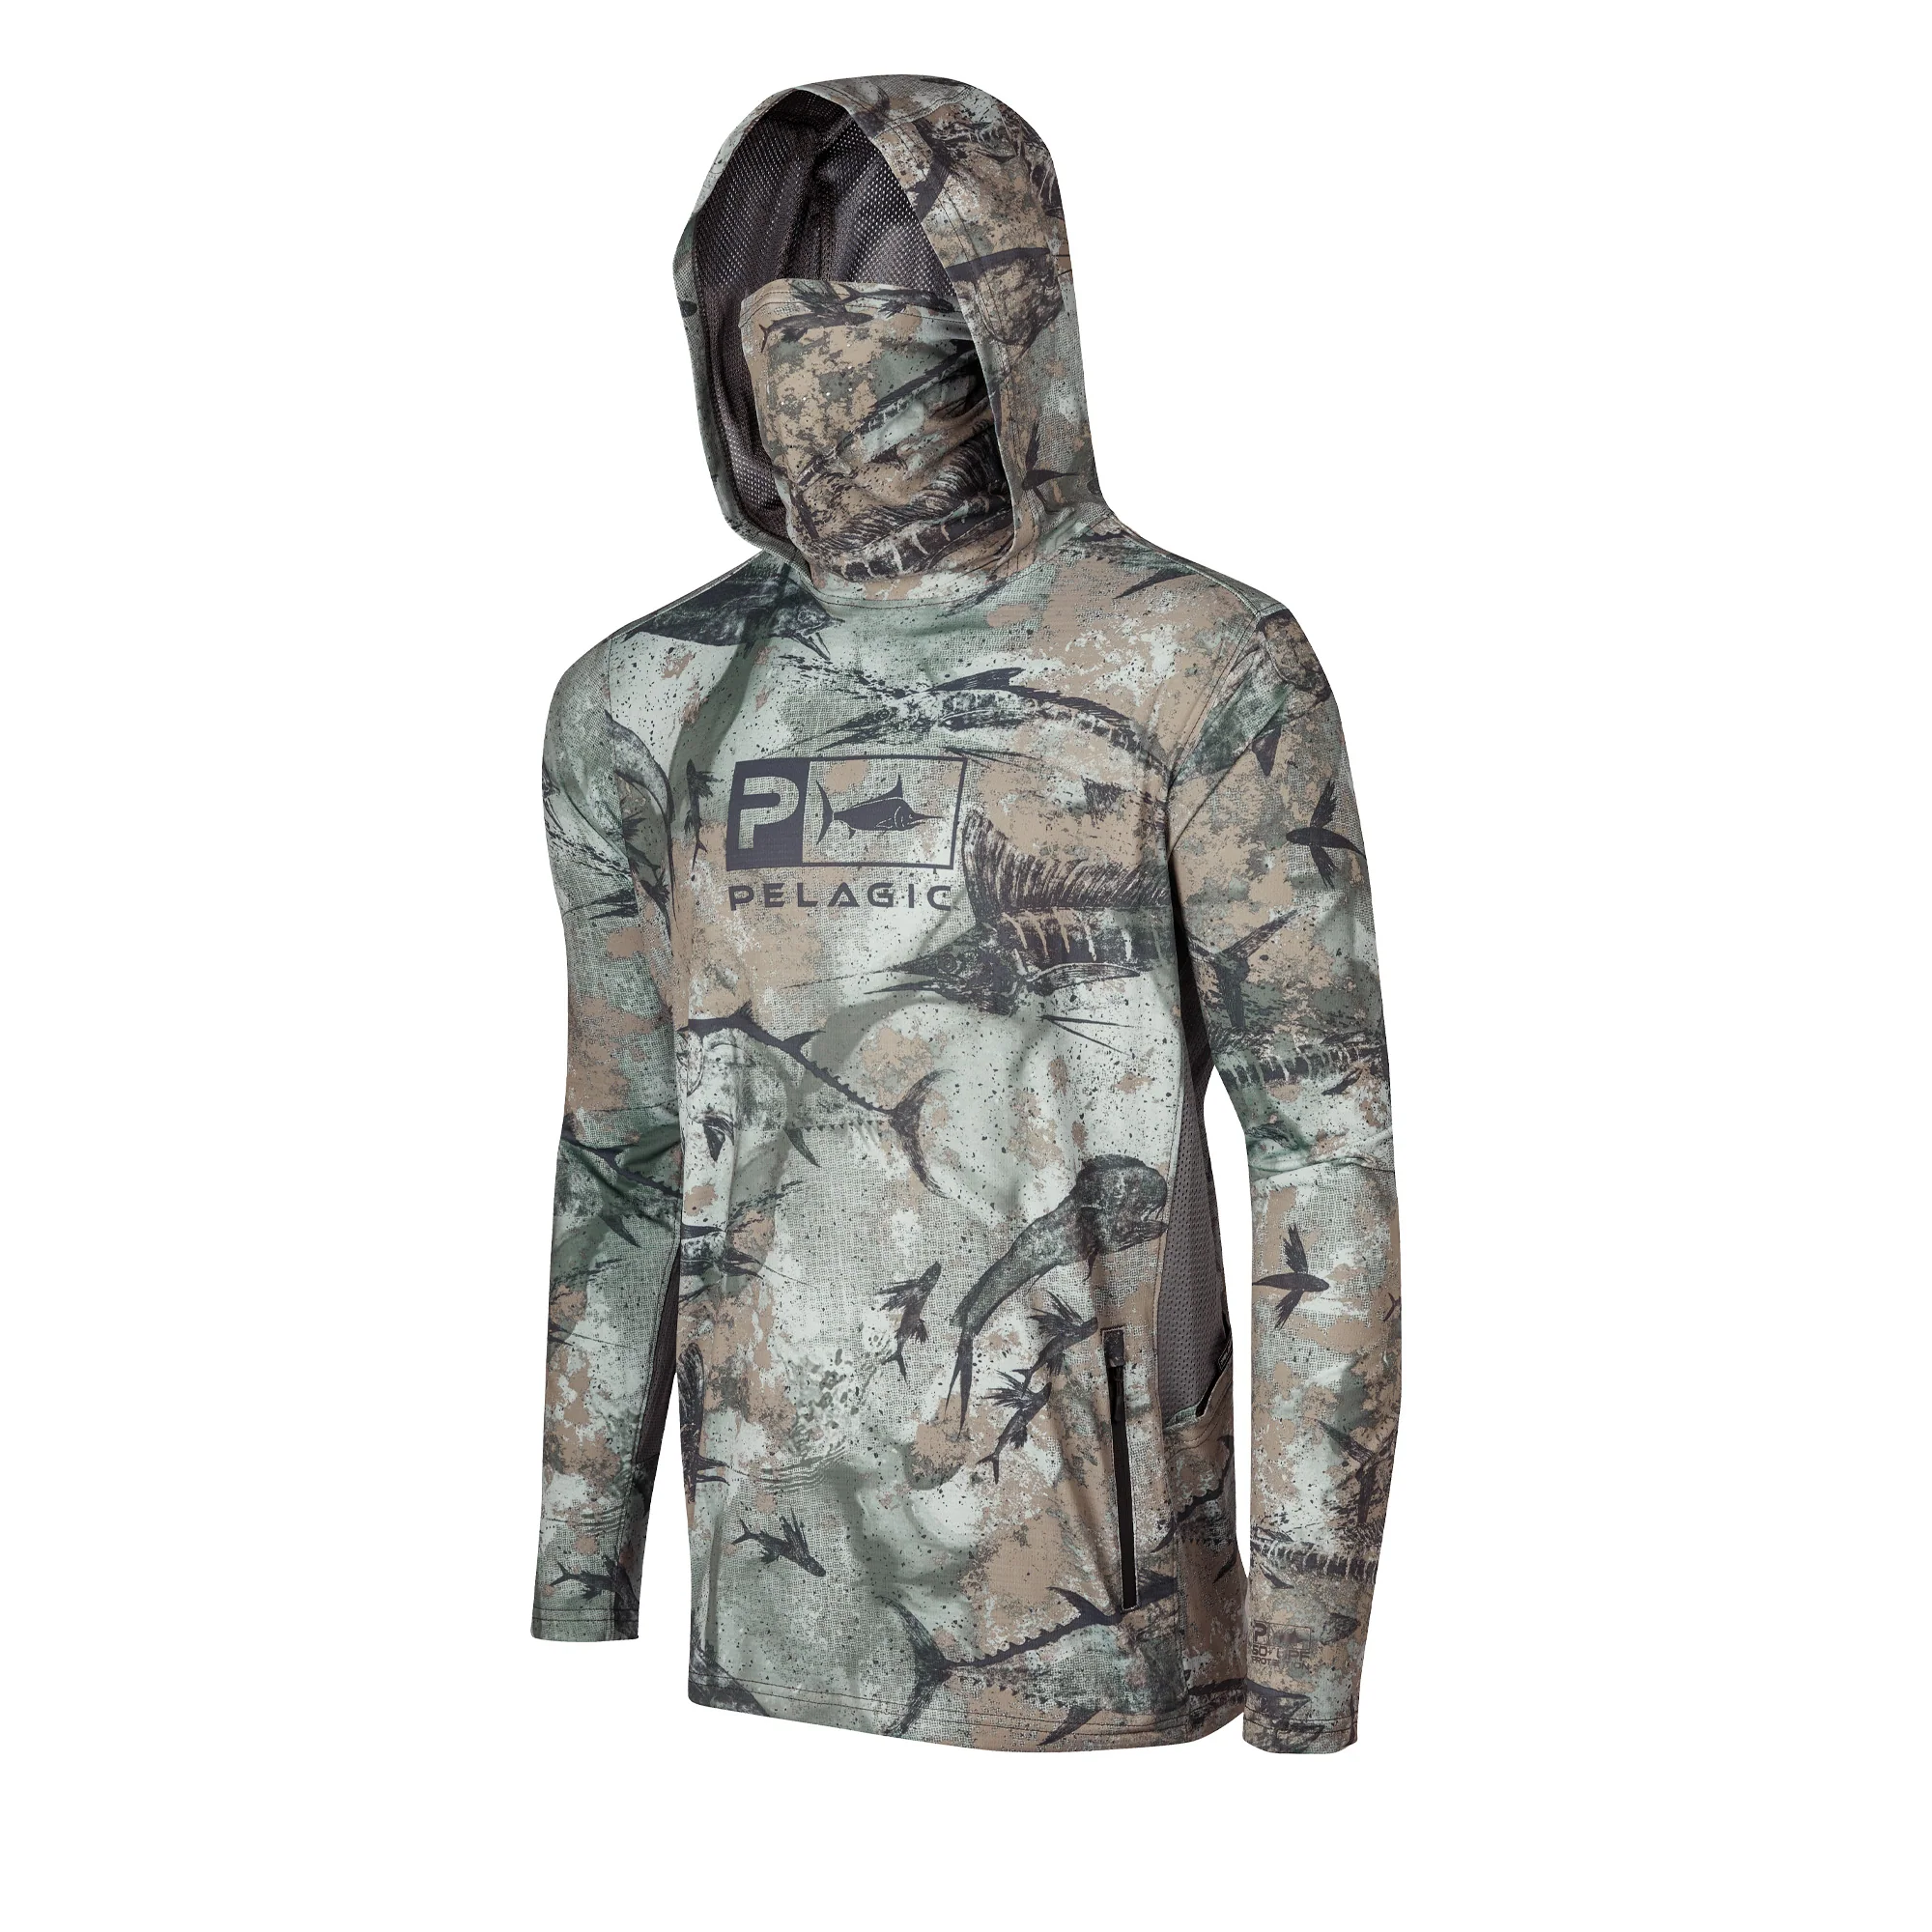 UV hooded top with face mask PELAGIC UPF 50+ EXO-TECH HOODED FISHING SHIRT  OPEN SEAS ARMY